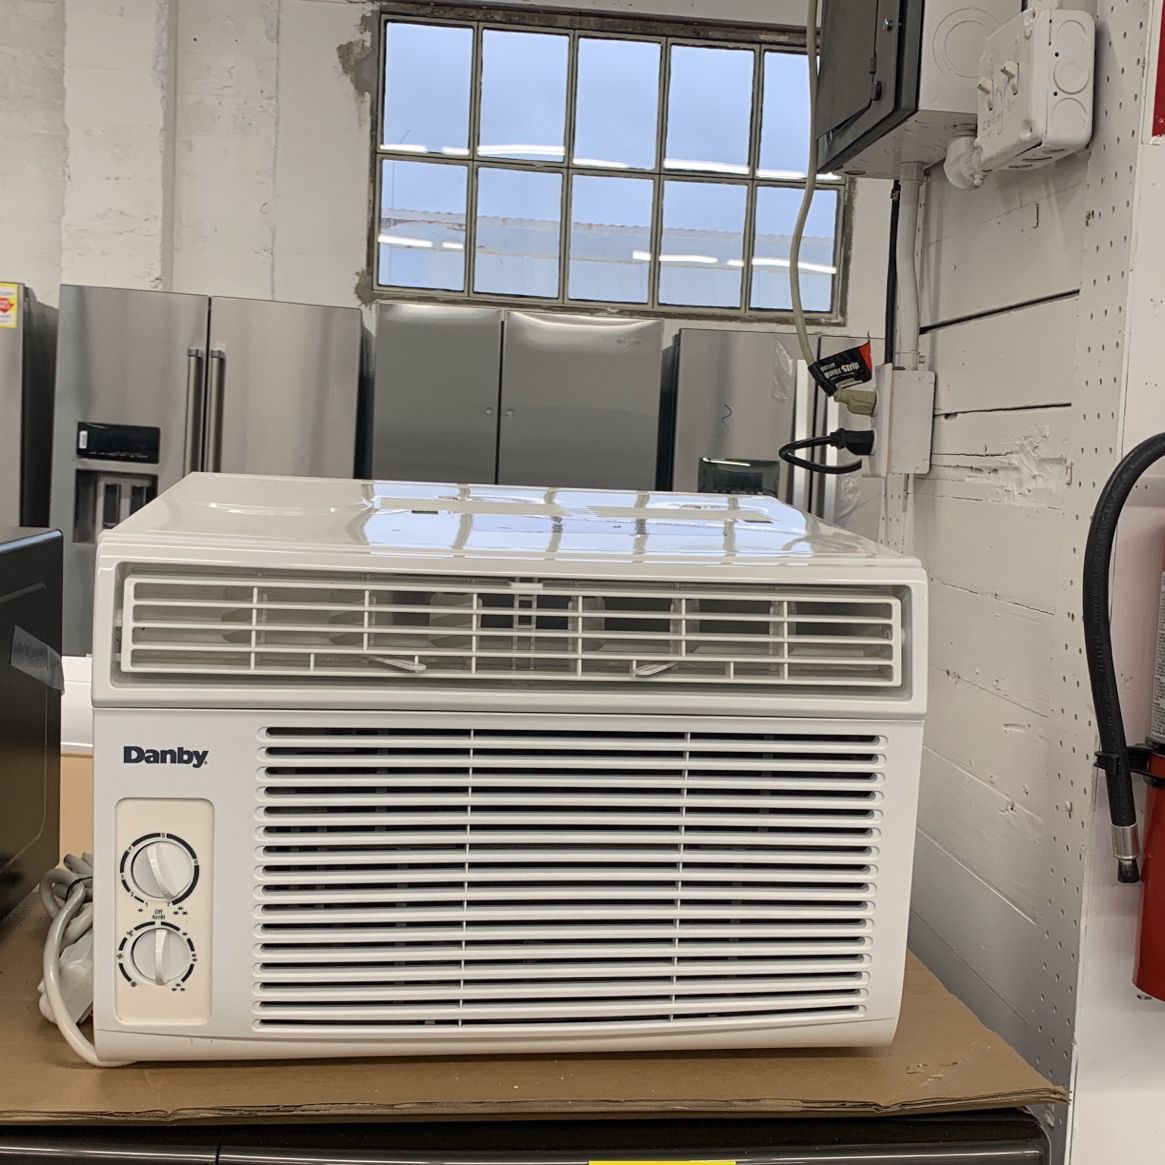  5,000 Window Air Conditioner, 2 Cooling and Fan Settings, Easy to Use Mechanical Rotary Controls, Ideal for Rooms Up to 150 Square Feet,$399